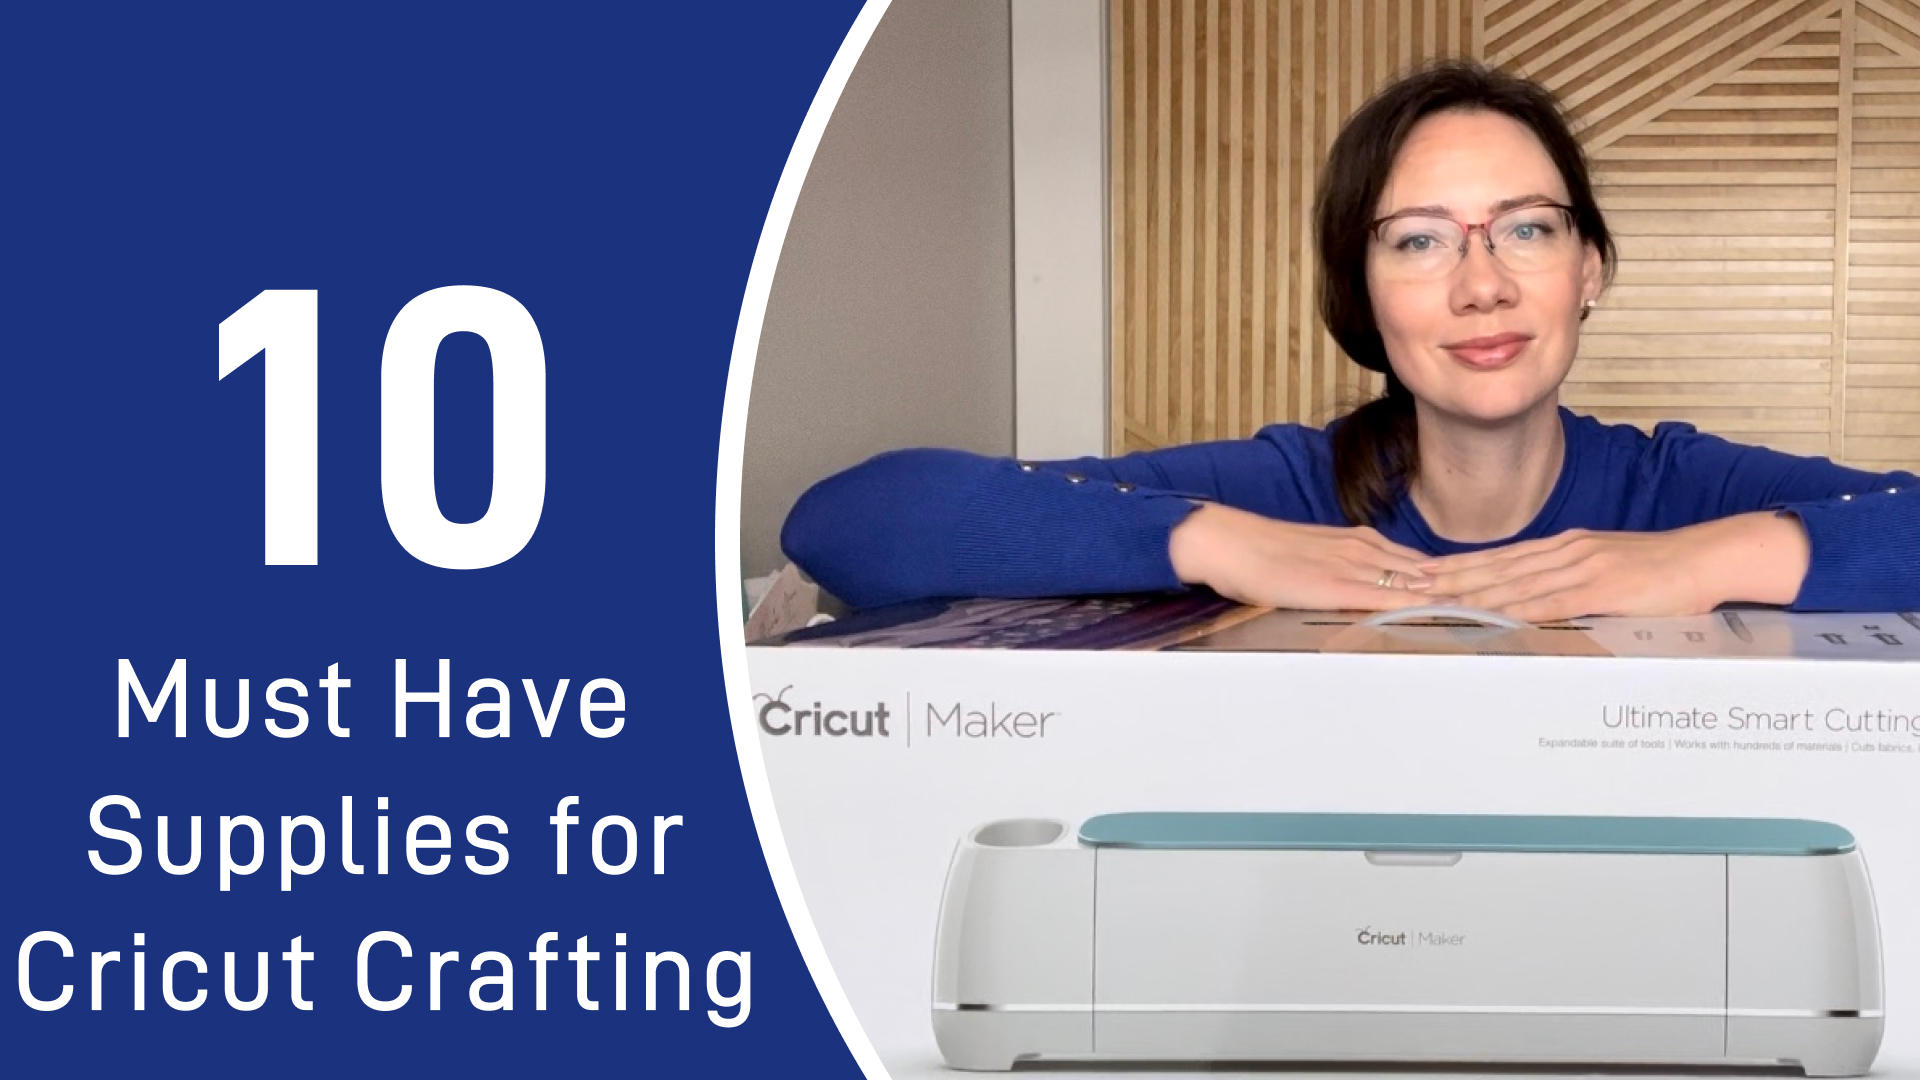 10 must-haves to get you started crafting with Cricut machine